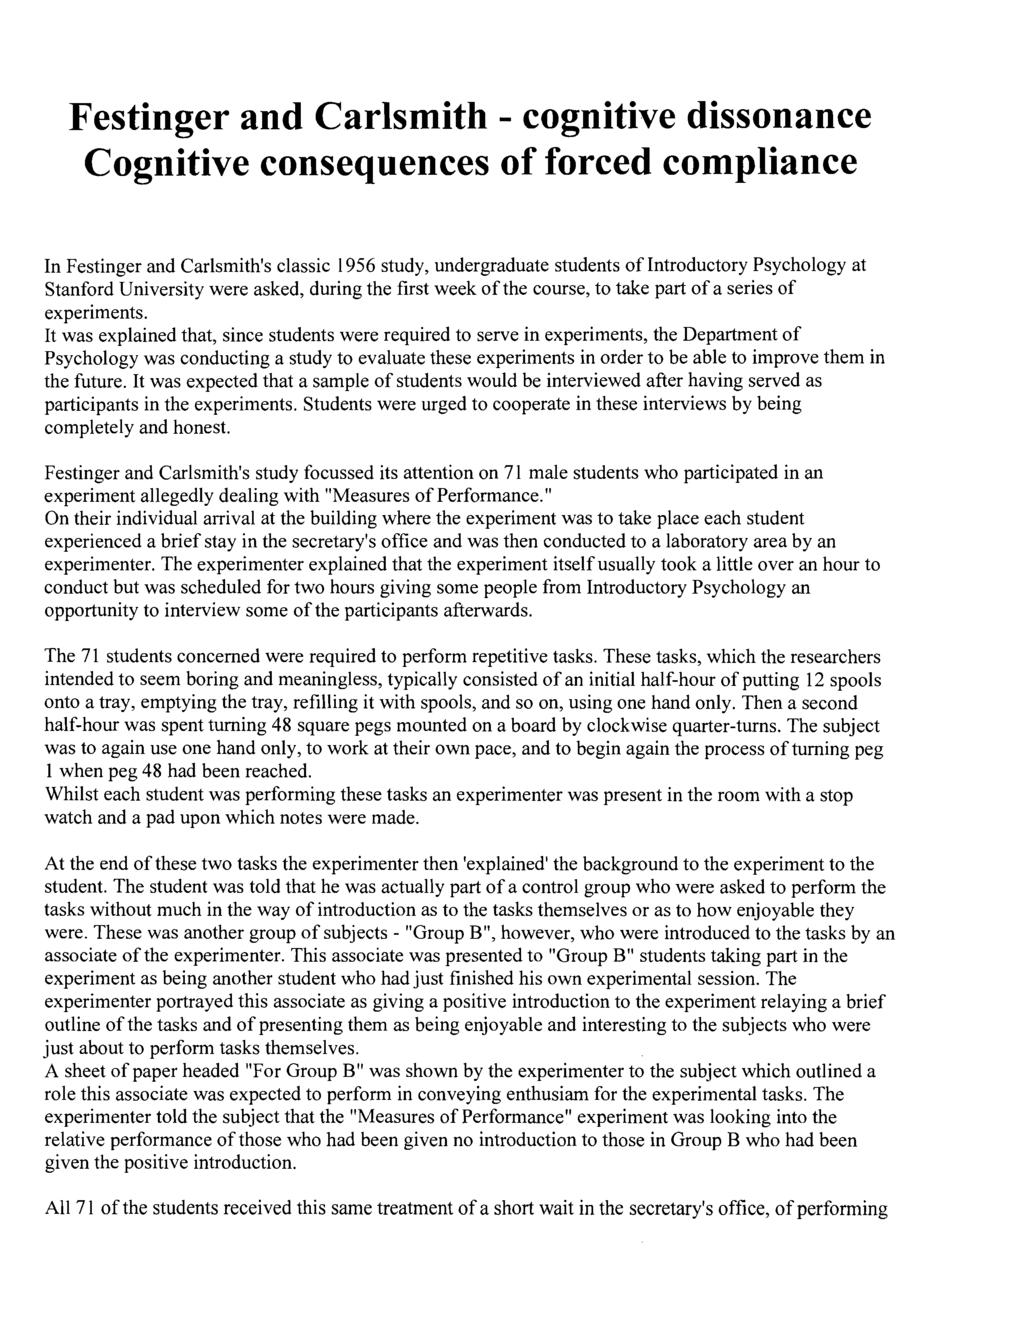 Festinger and Carlsmith - cognitive dissonance Cognitive consequences of forced compliance In Festinger and Carlsmith's classic 1956 study, undergraduate students of Introductory Psychology at